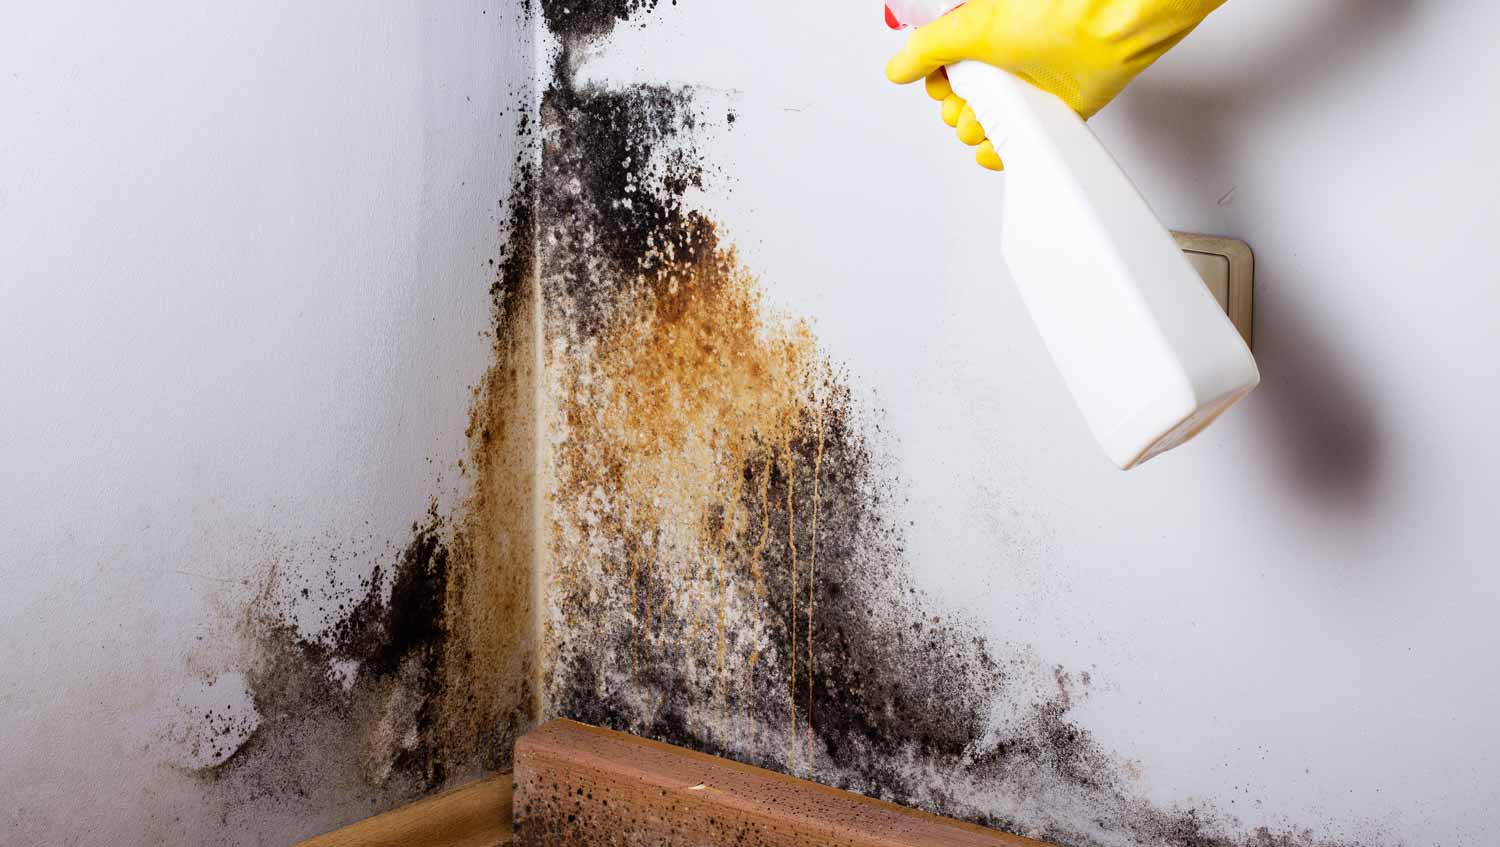 mold testing mold remediation Youngsville NC mold removal mold damage repair